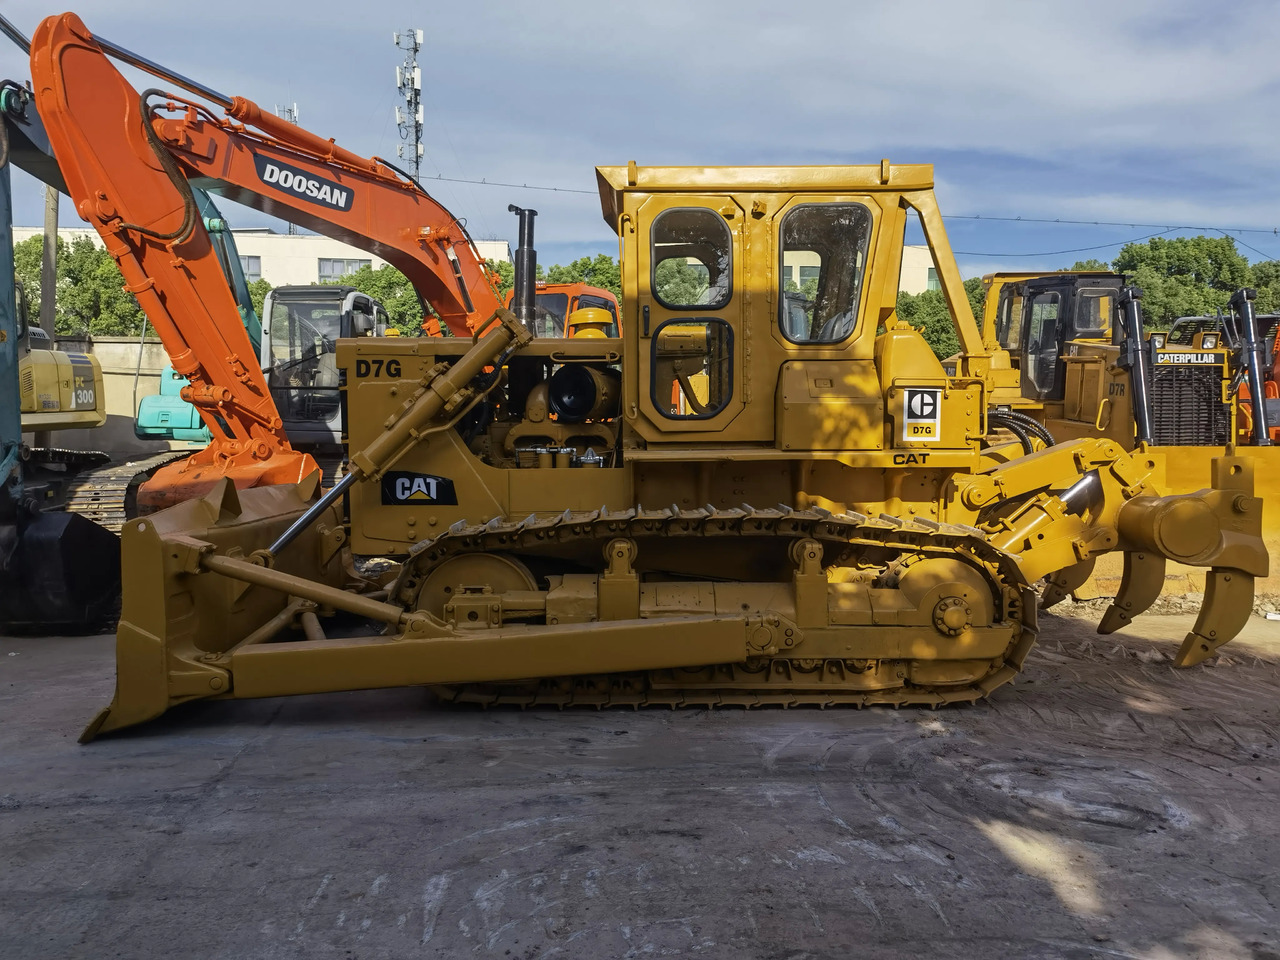 Used caterpillar bulldozer D7G secondhand caterpillar used bulldozer D7G D6G in stock now - Bulldozer: picture 3